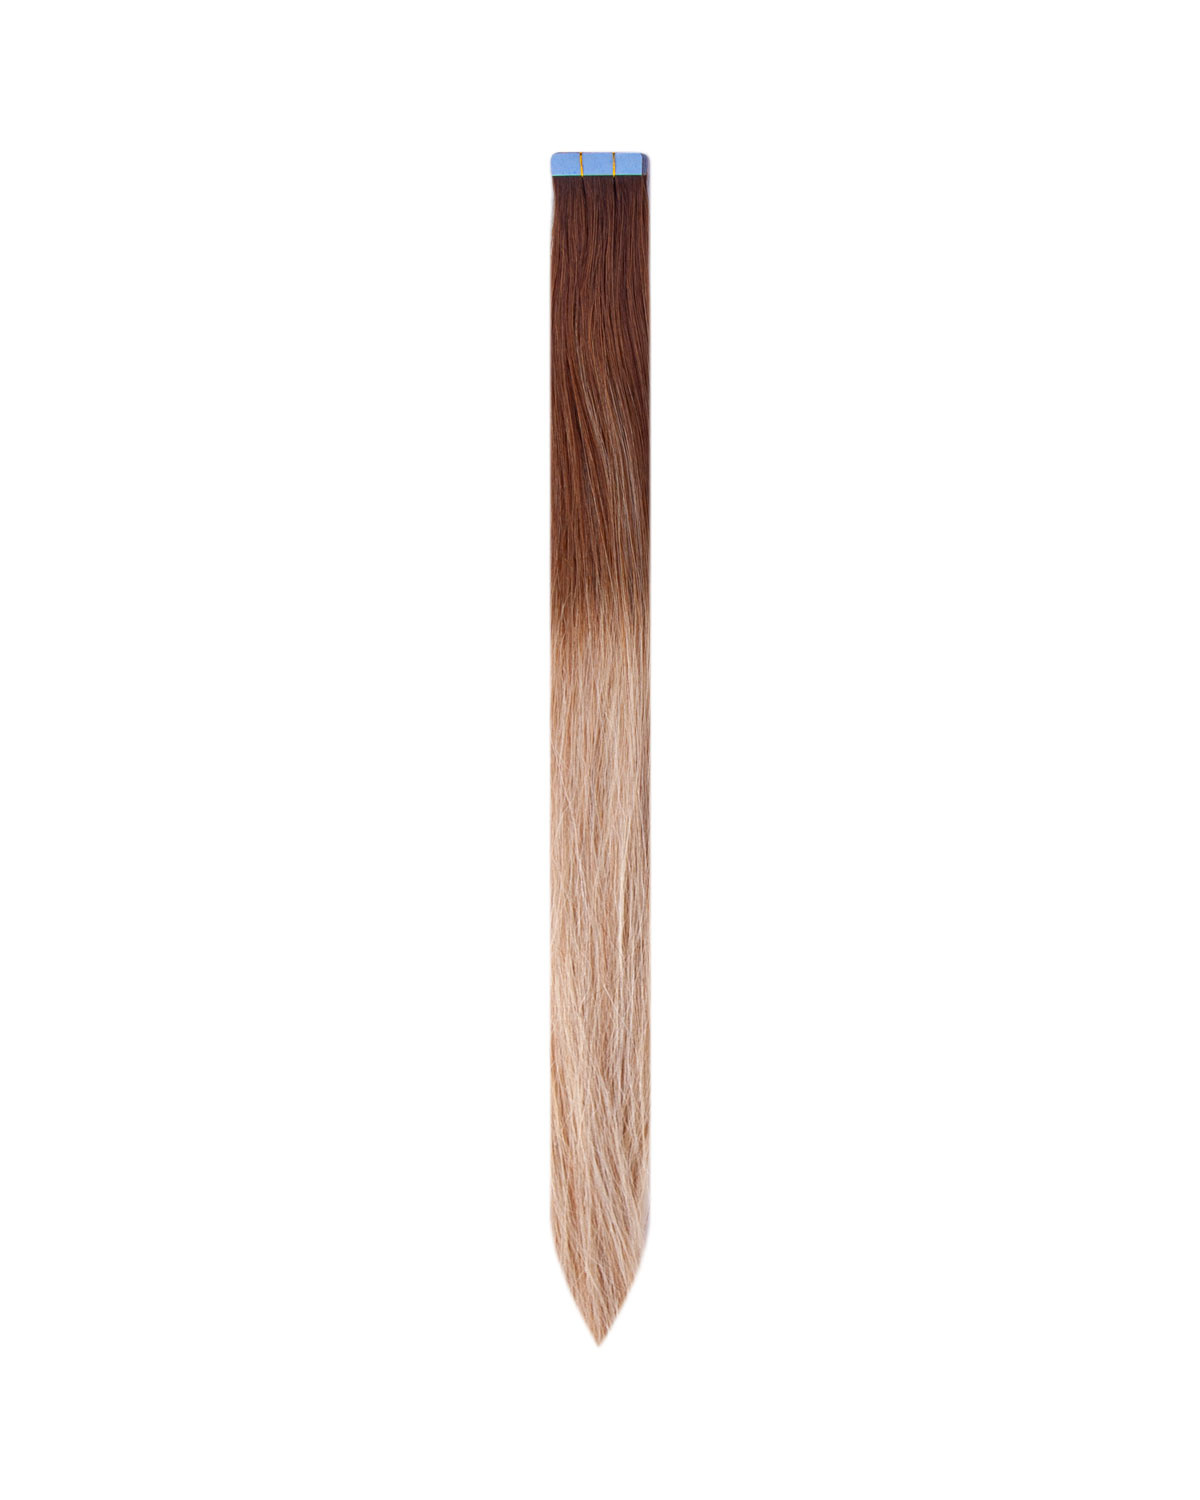 SilverFox Tape Extensions Straight - #T3/116  Ombre Chocolate Brown/ Ash Light Blond - 50 cm